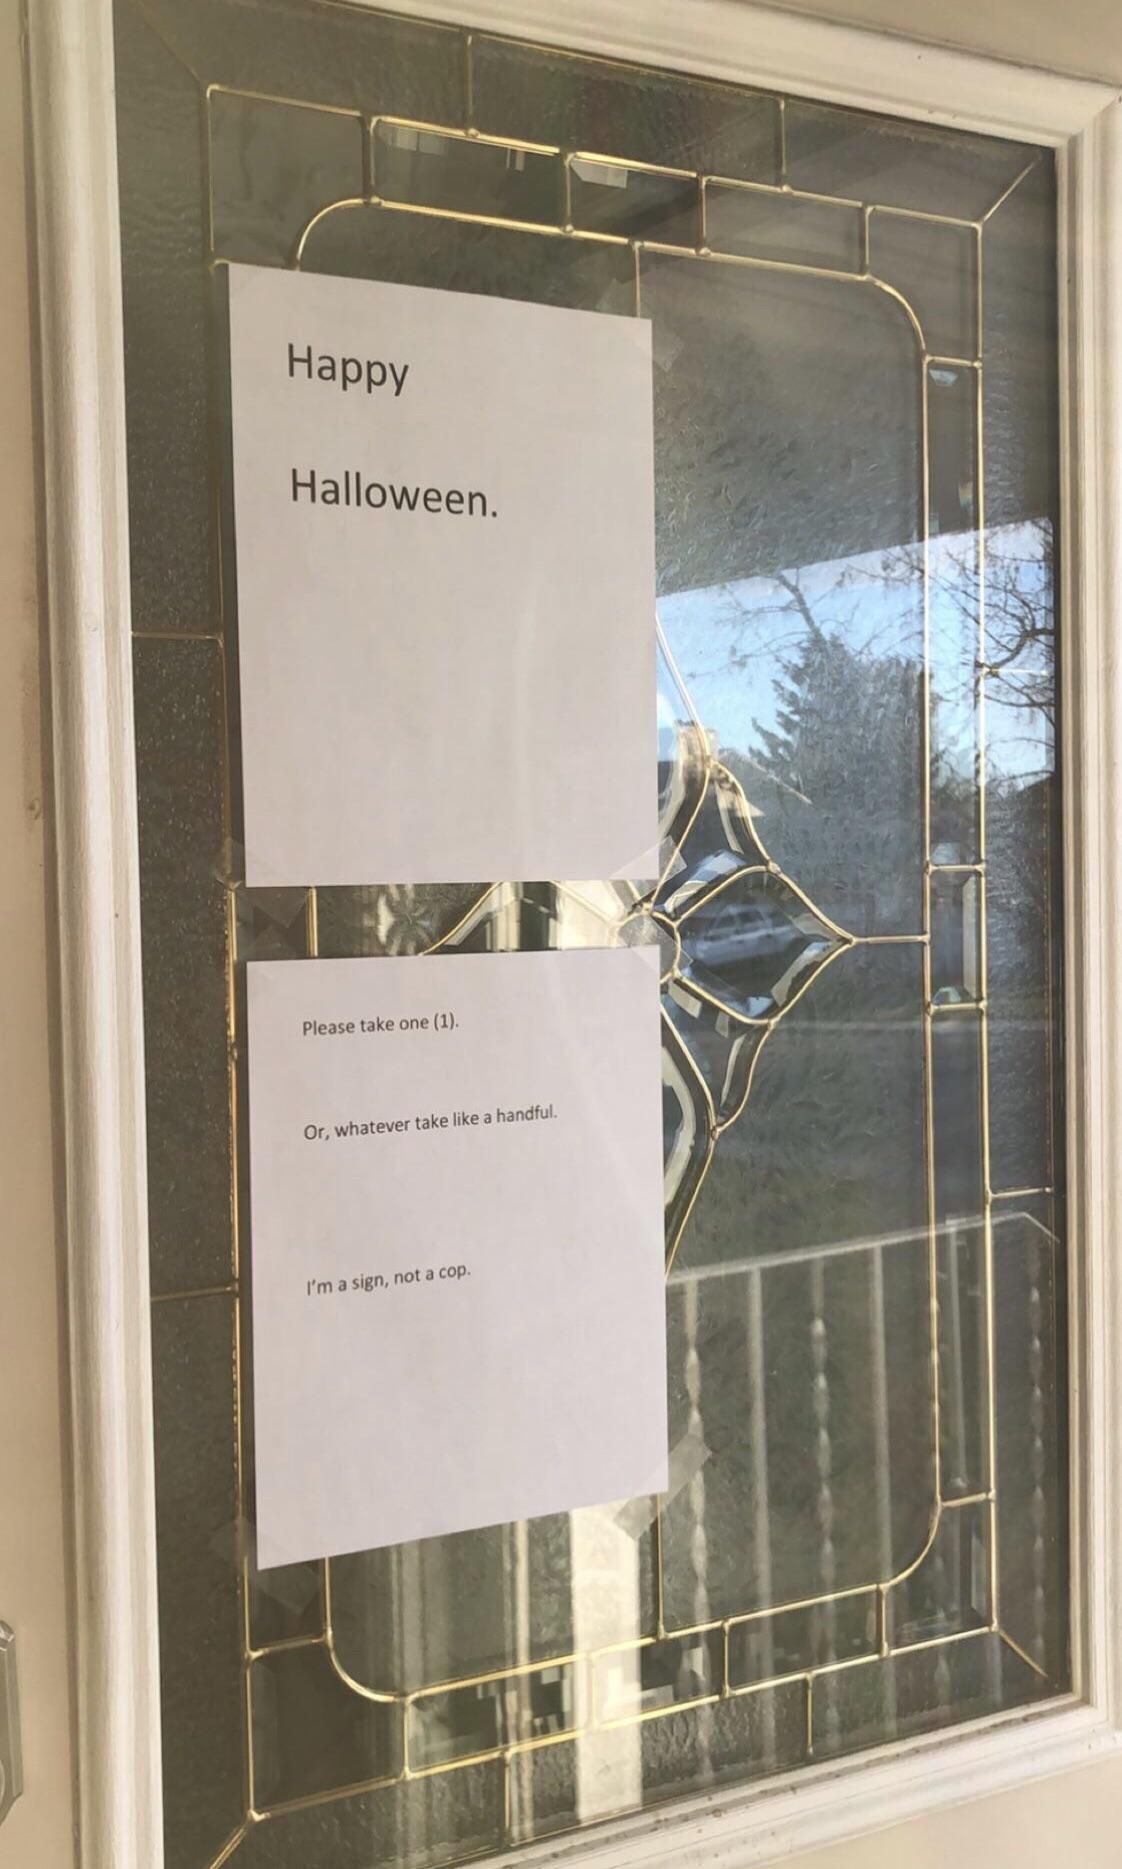 My favorite house we trick-or-treated at tonight. This was their only decoration.